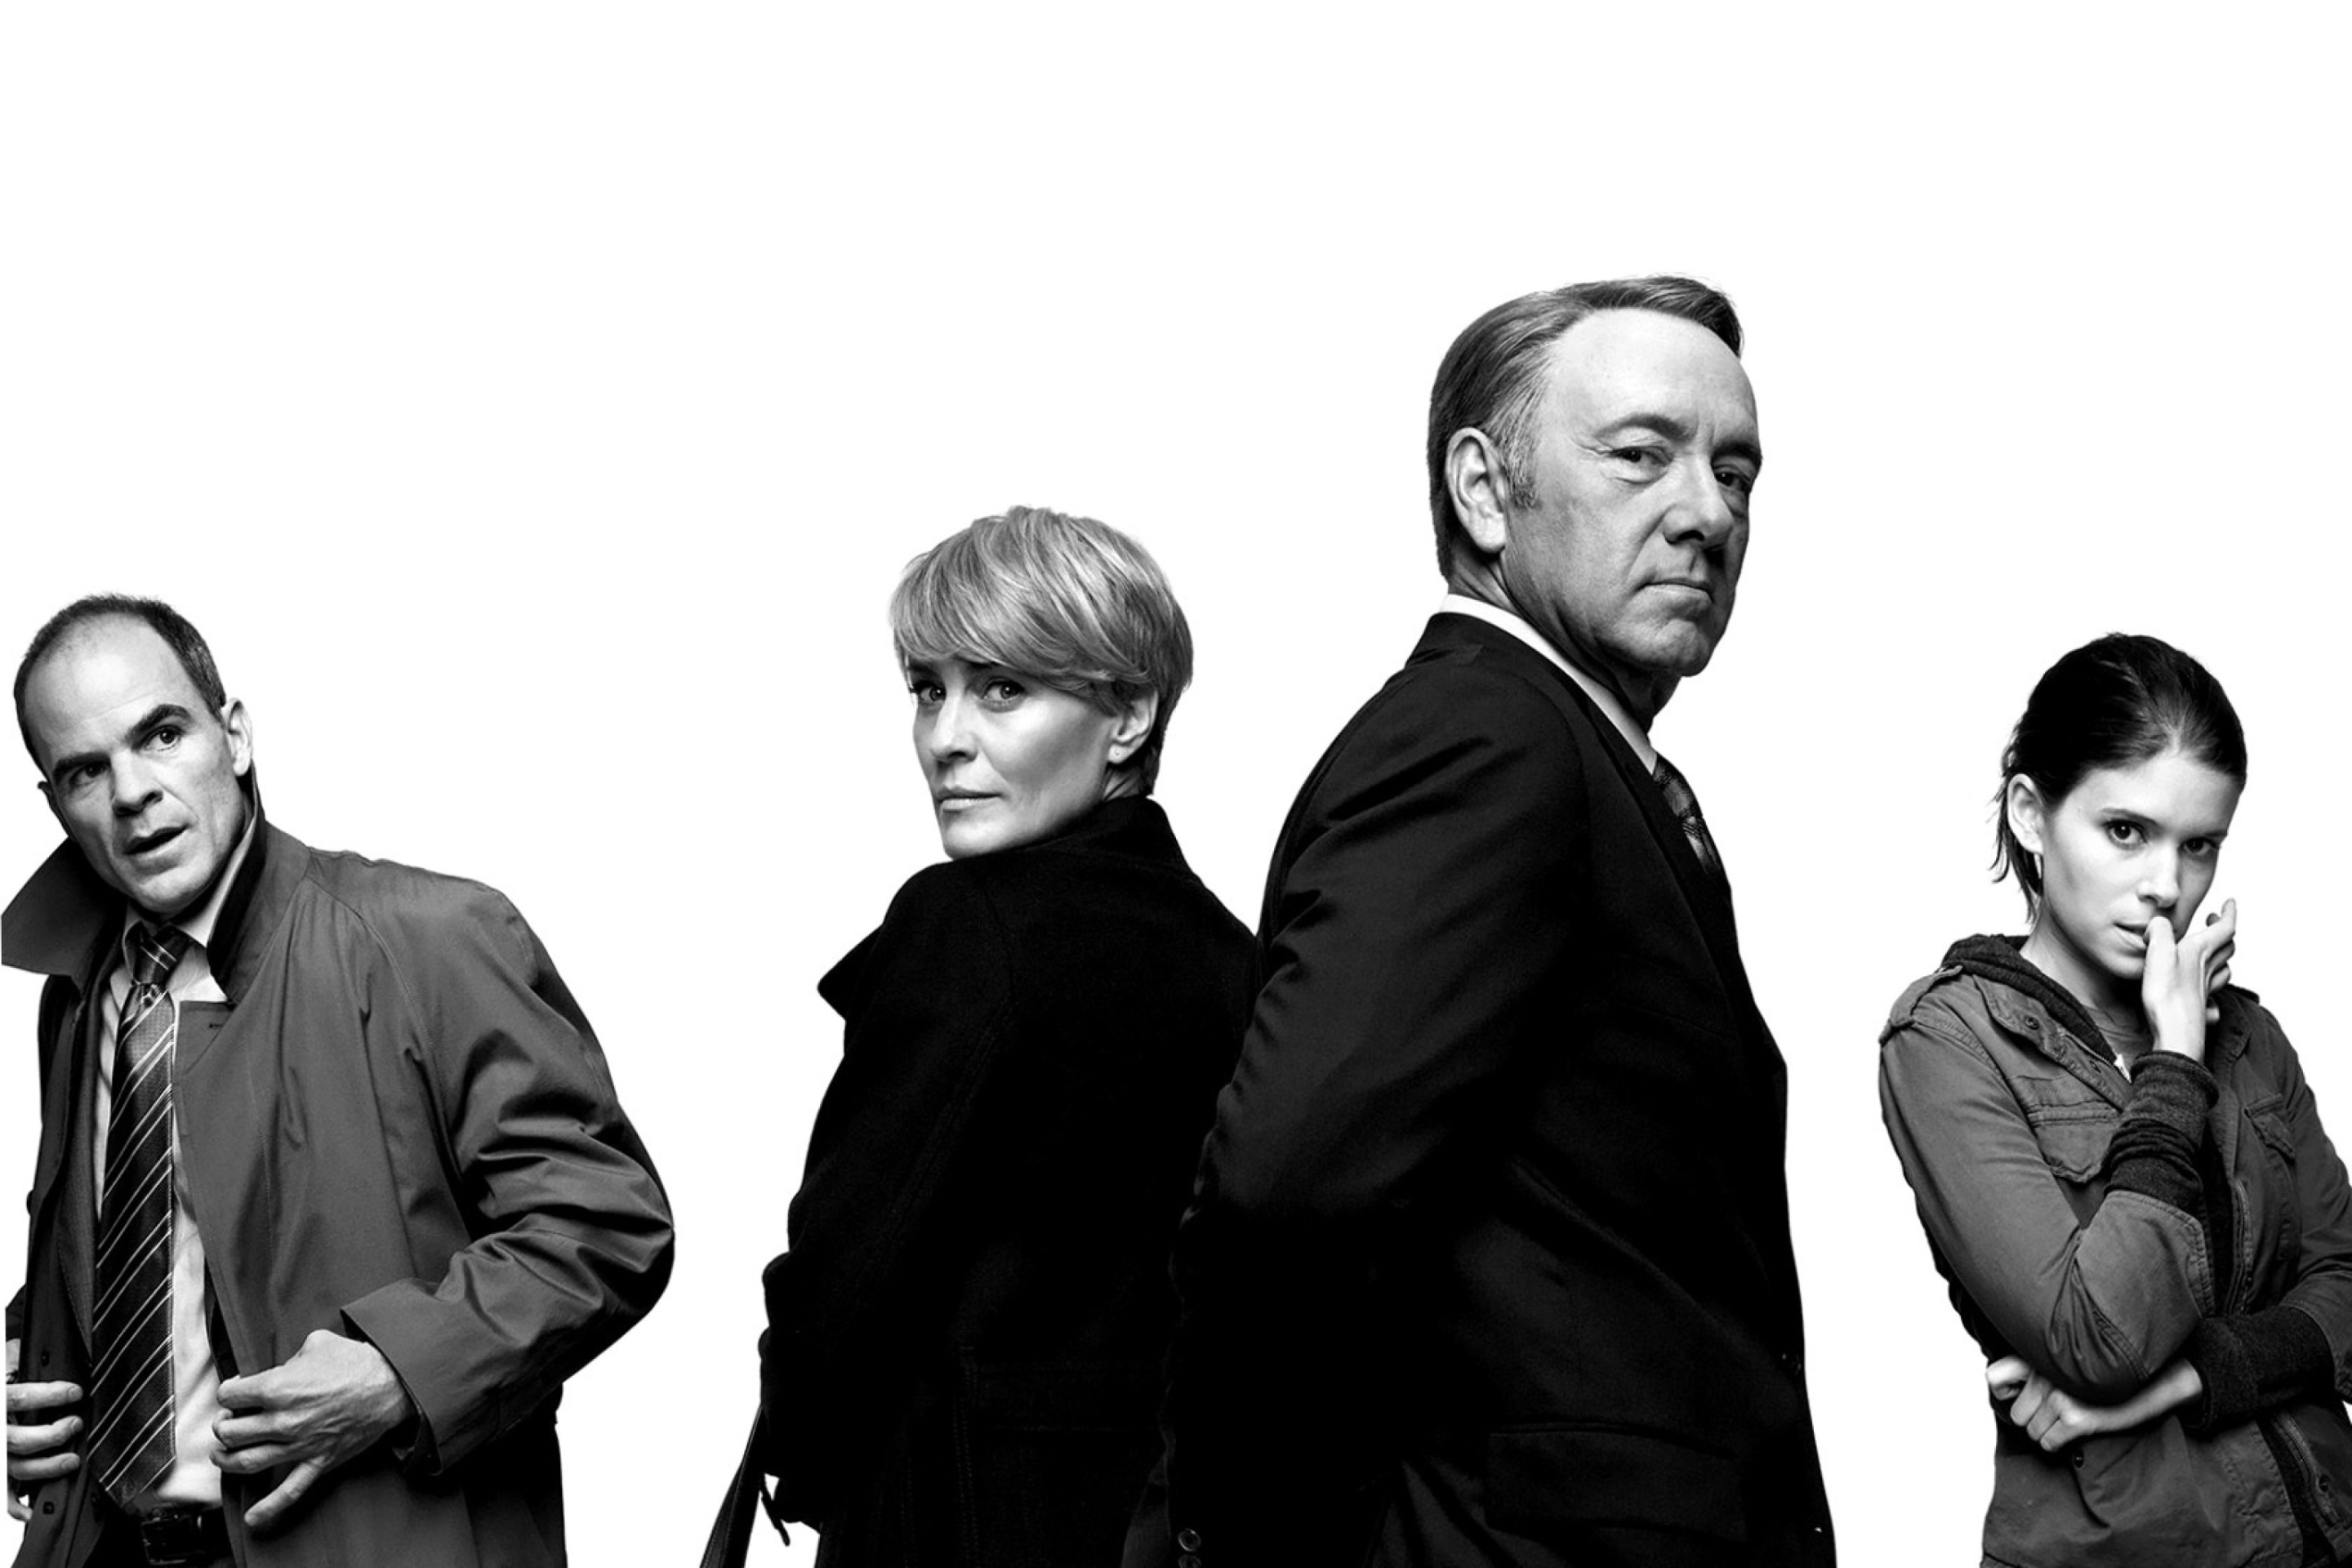 Das House of Cards with Kevin Spacey Wallpaper 2880x1920